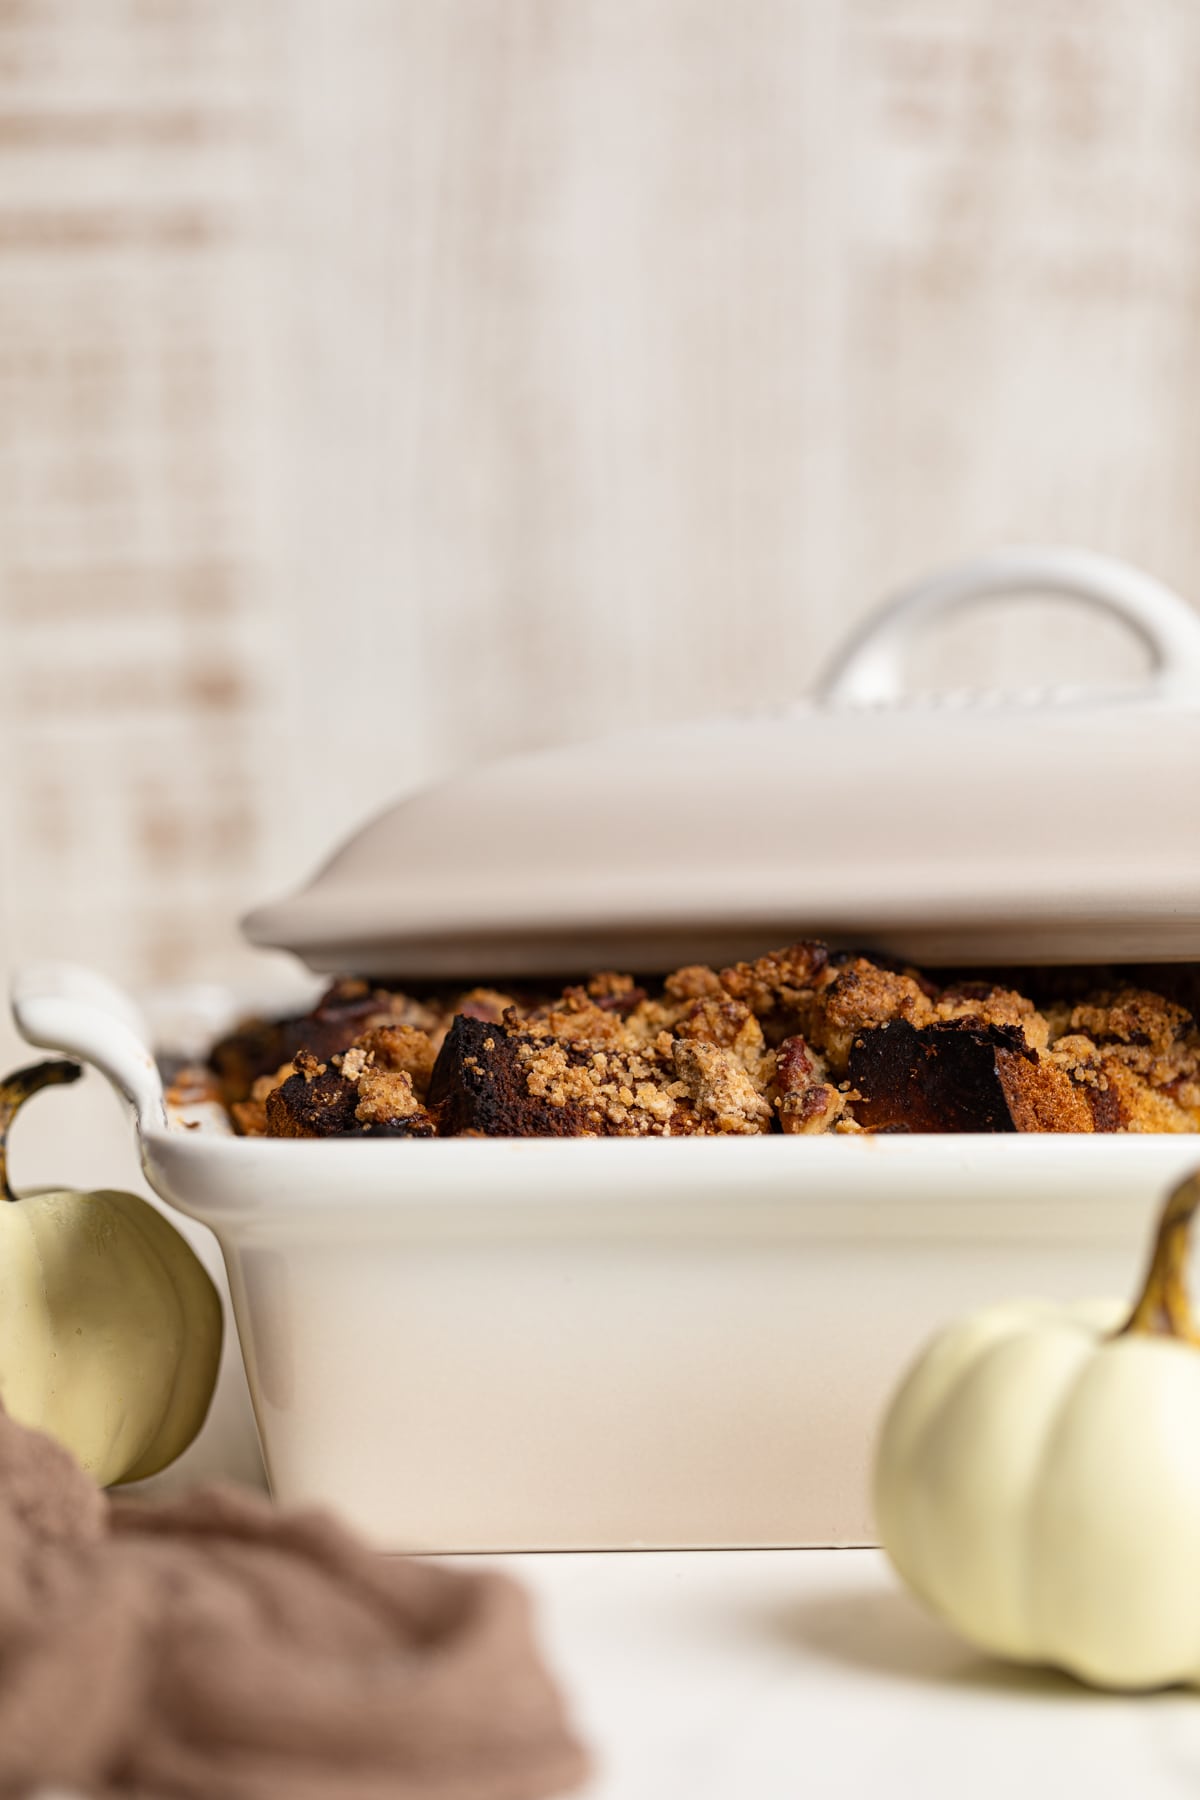 Baked Pumpkin French Toast Casserole in a baking pan with the lid half on